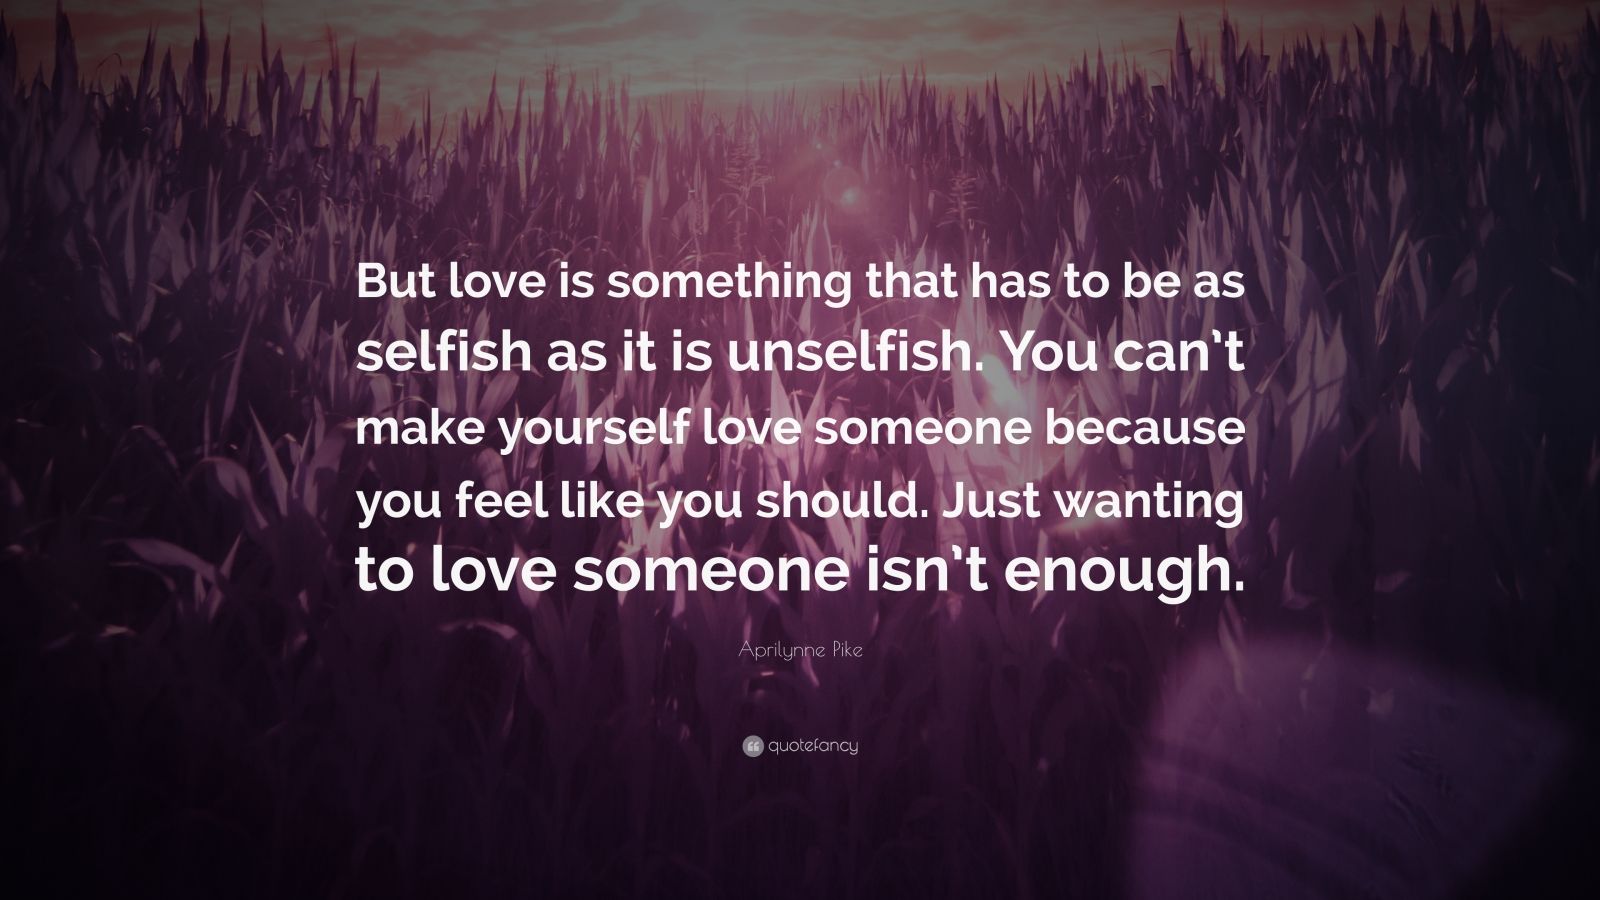 Aprilynne Pike Quote: “But love is something that has to be as selfish ...